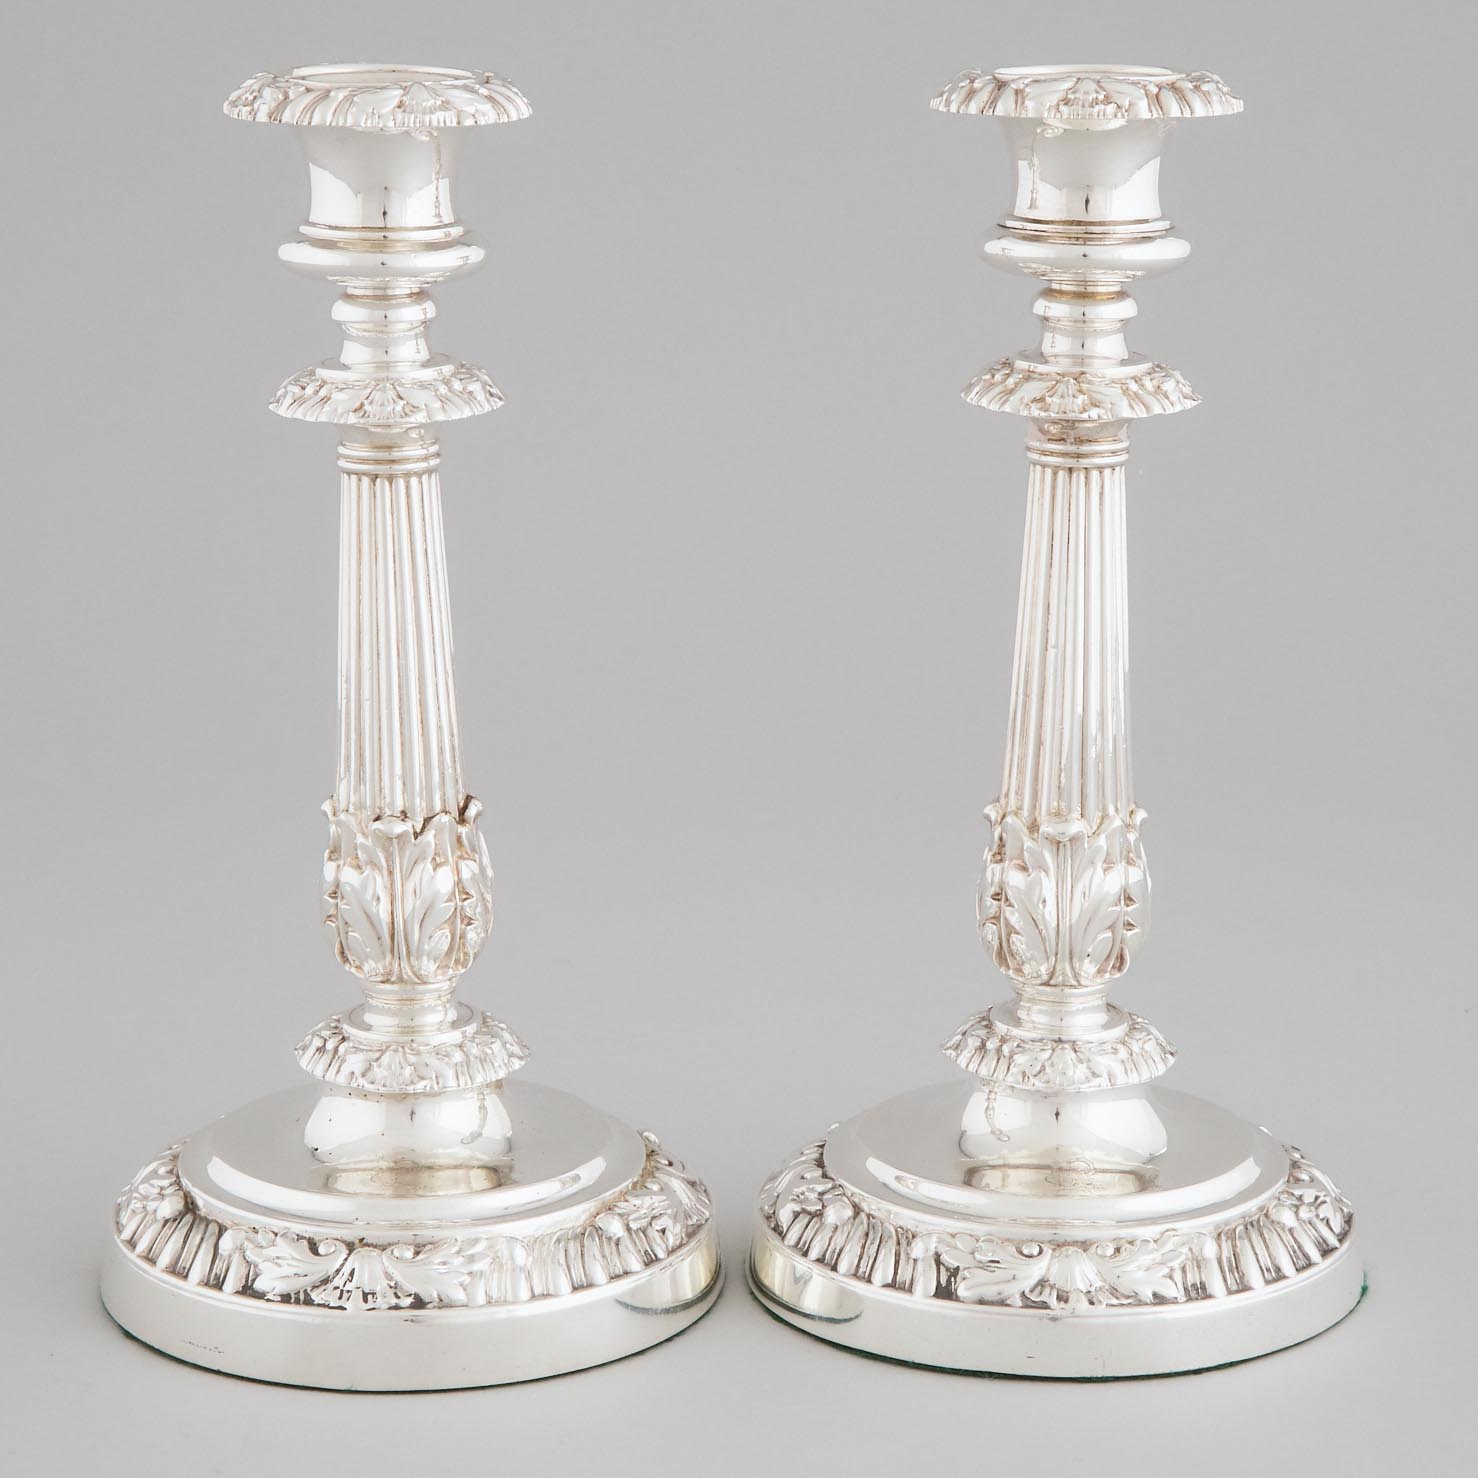 Pair of George IV Silver Table 3ac00a